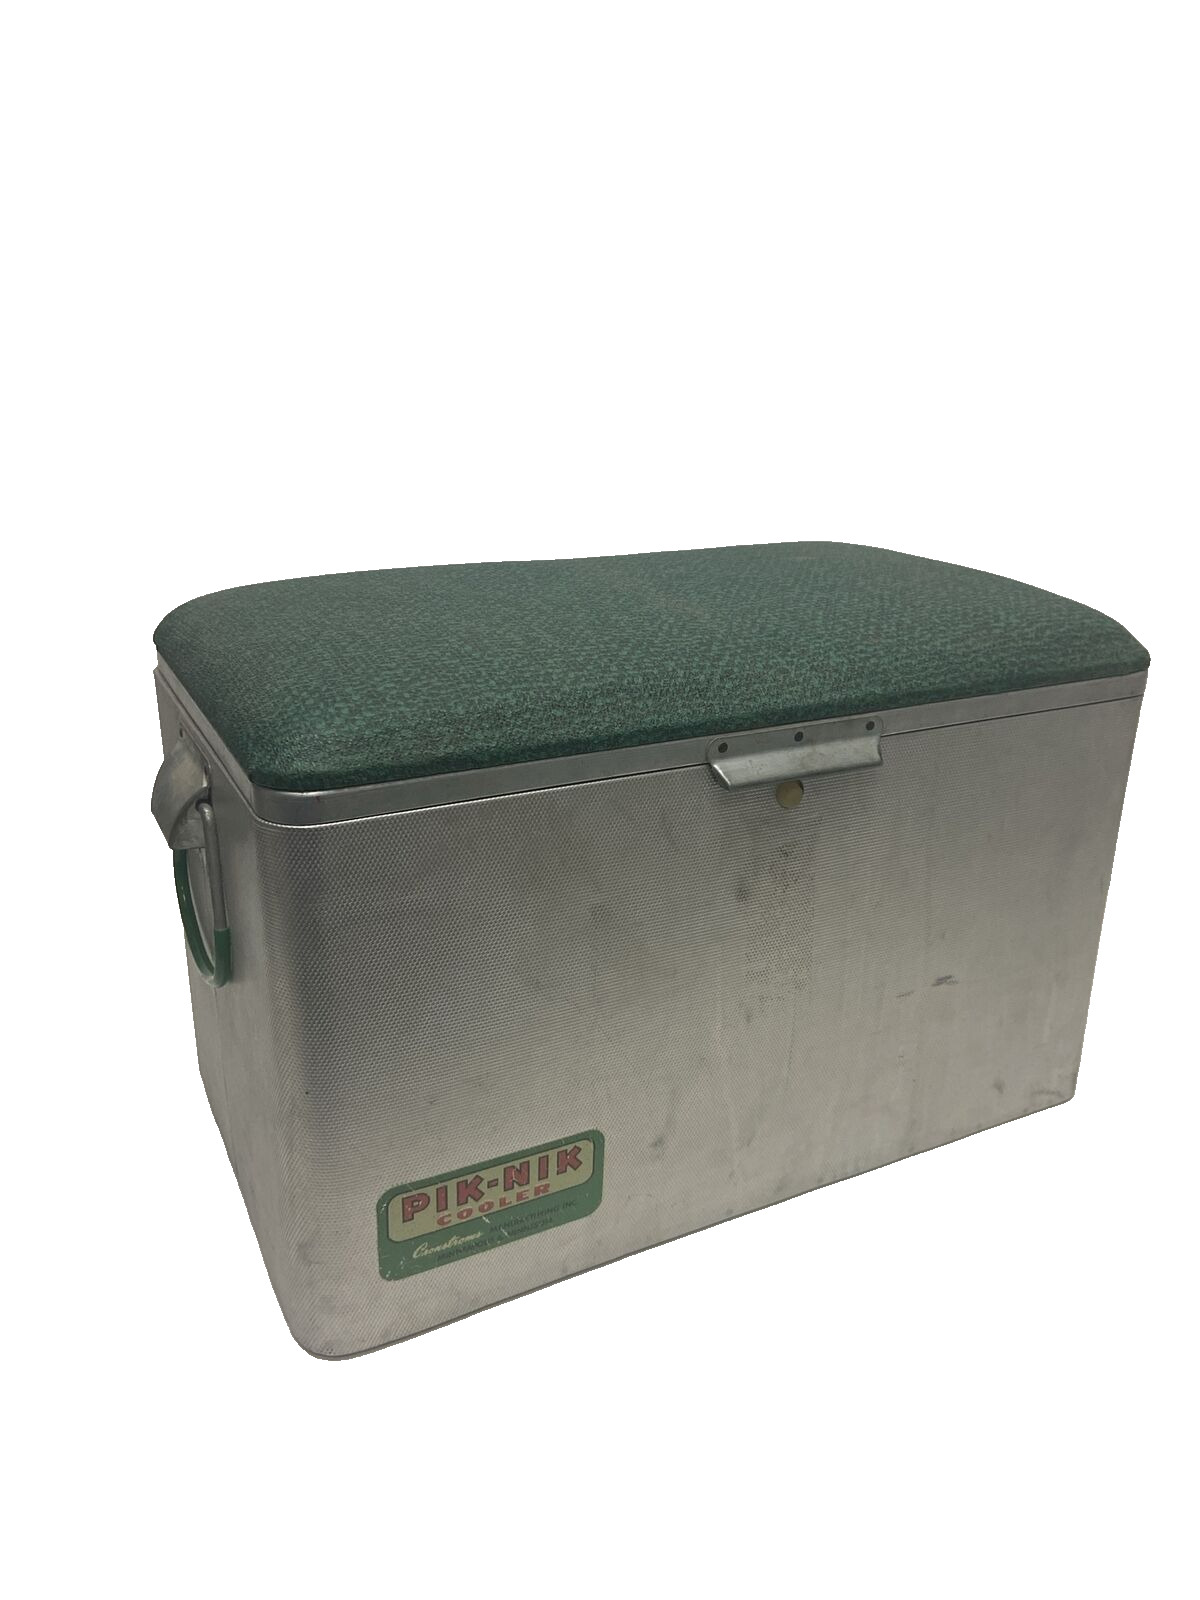 Vintage 50s Aluminum PIK-NIK Outdoor Ice Chest Cooler w/ Padded Seat